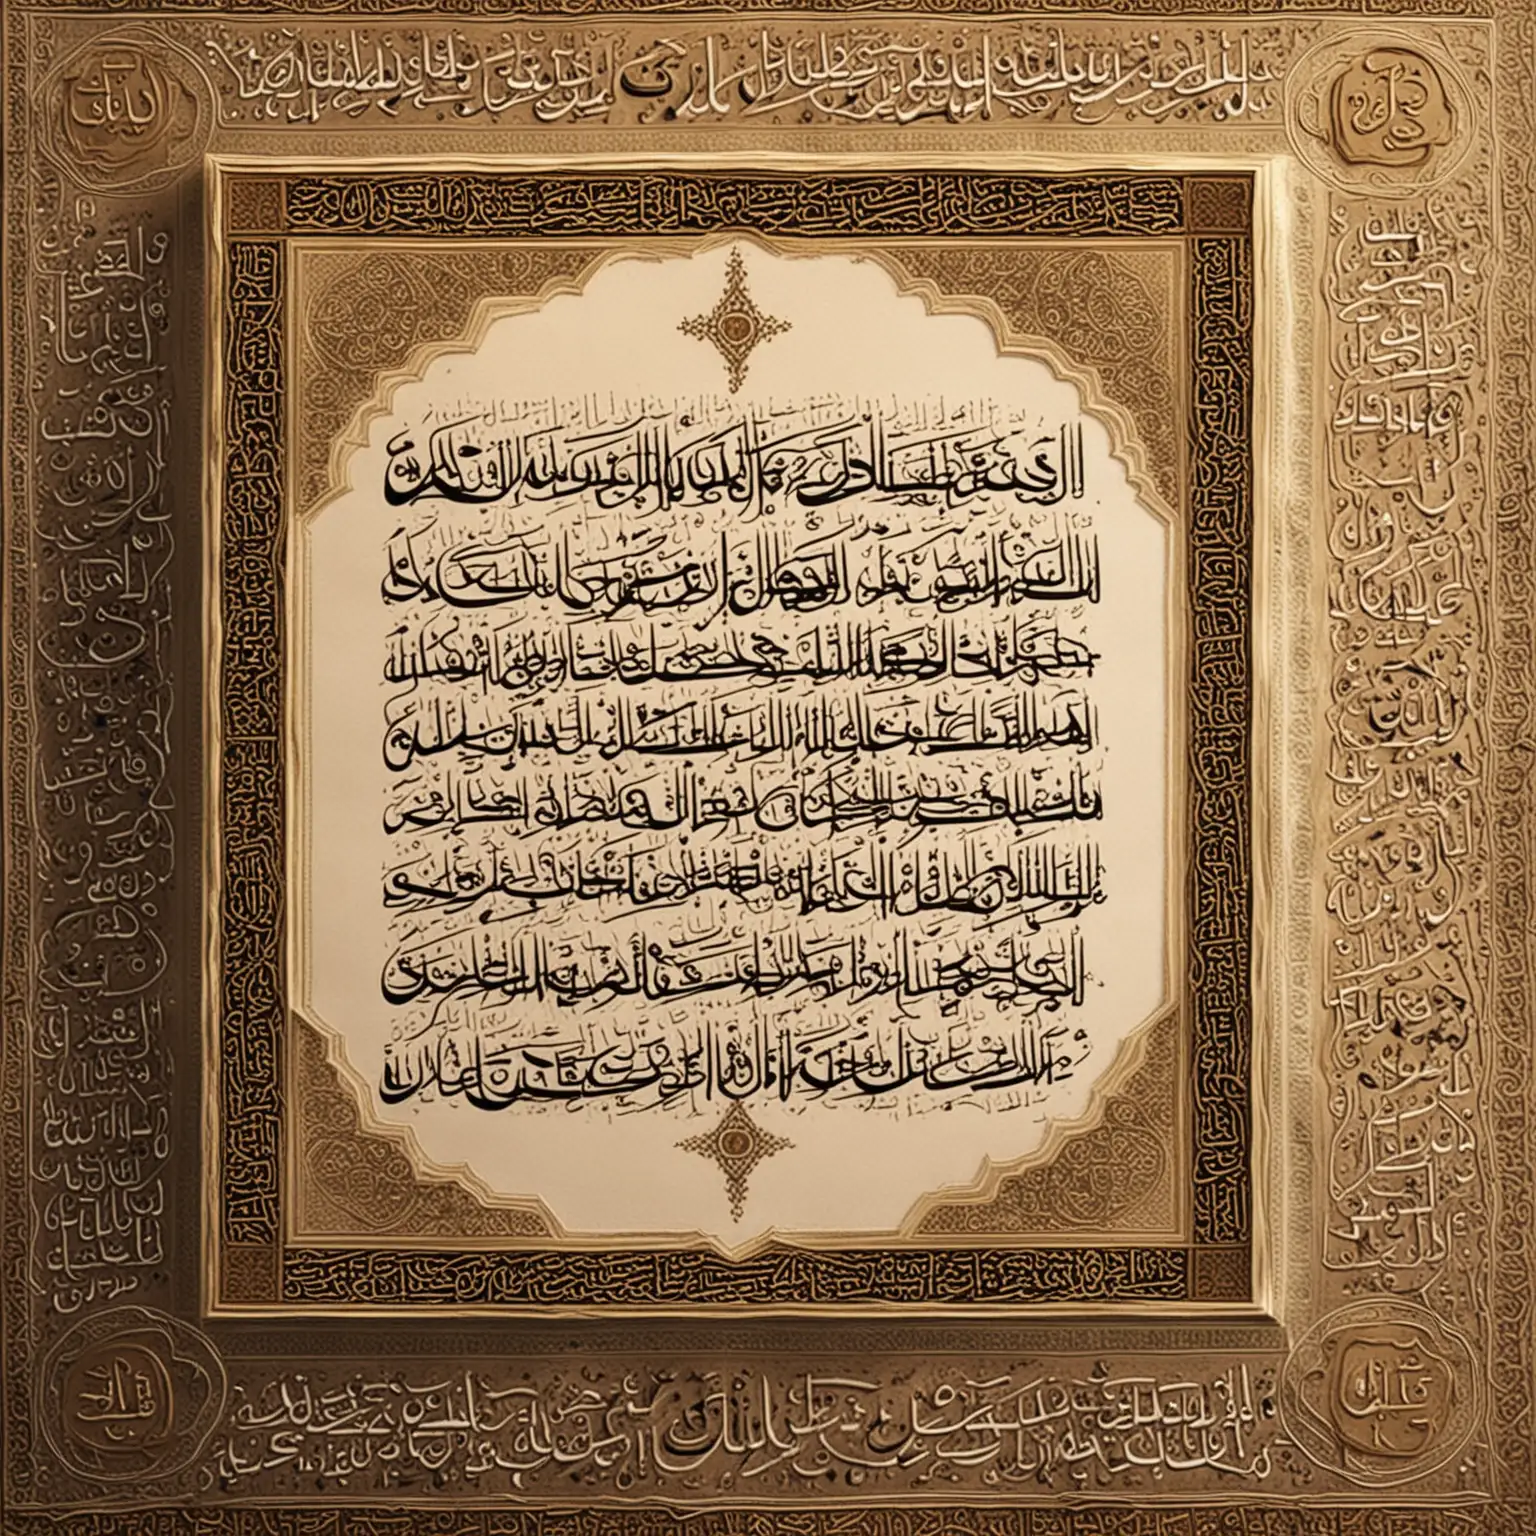 We have downloaded a Koran in Arabic for you to understand and think about.